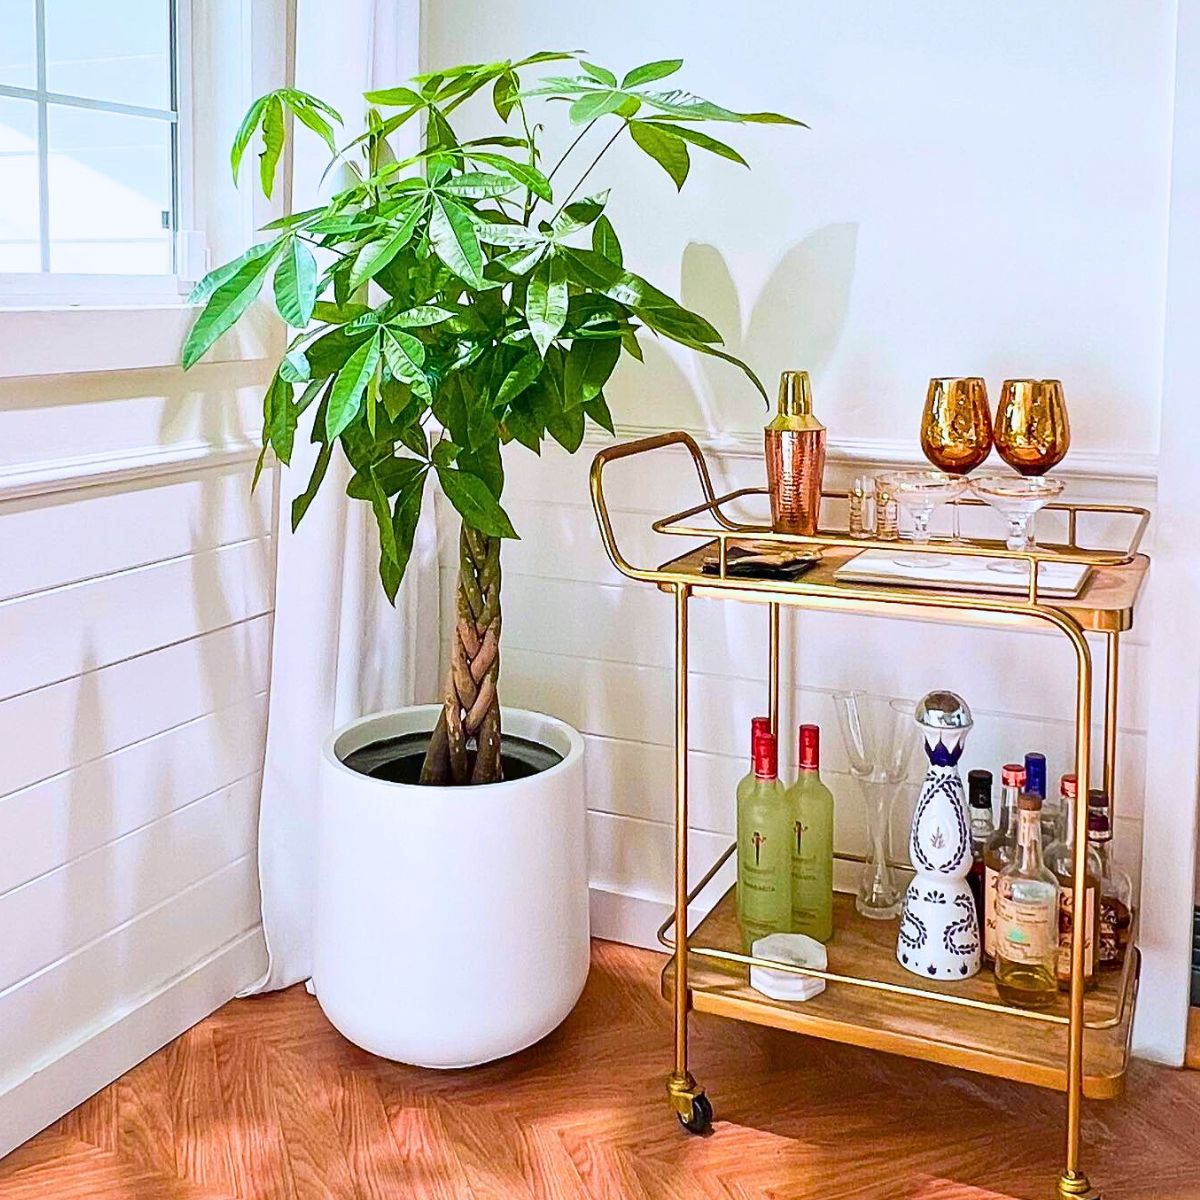 Air-Purifying Plants to Give Your Home a Breath of Fresh Air